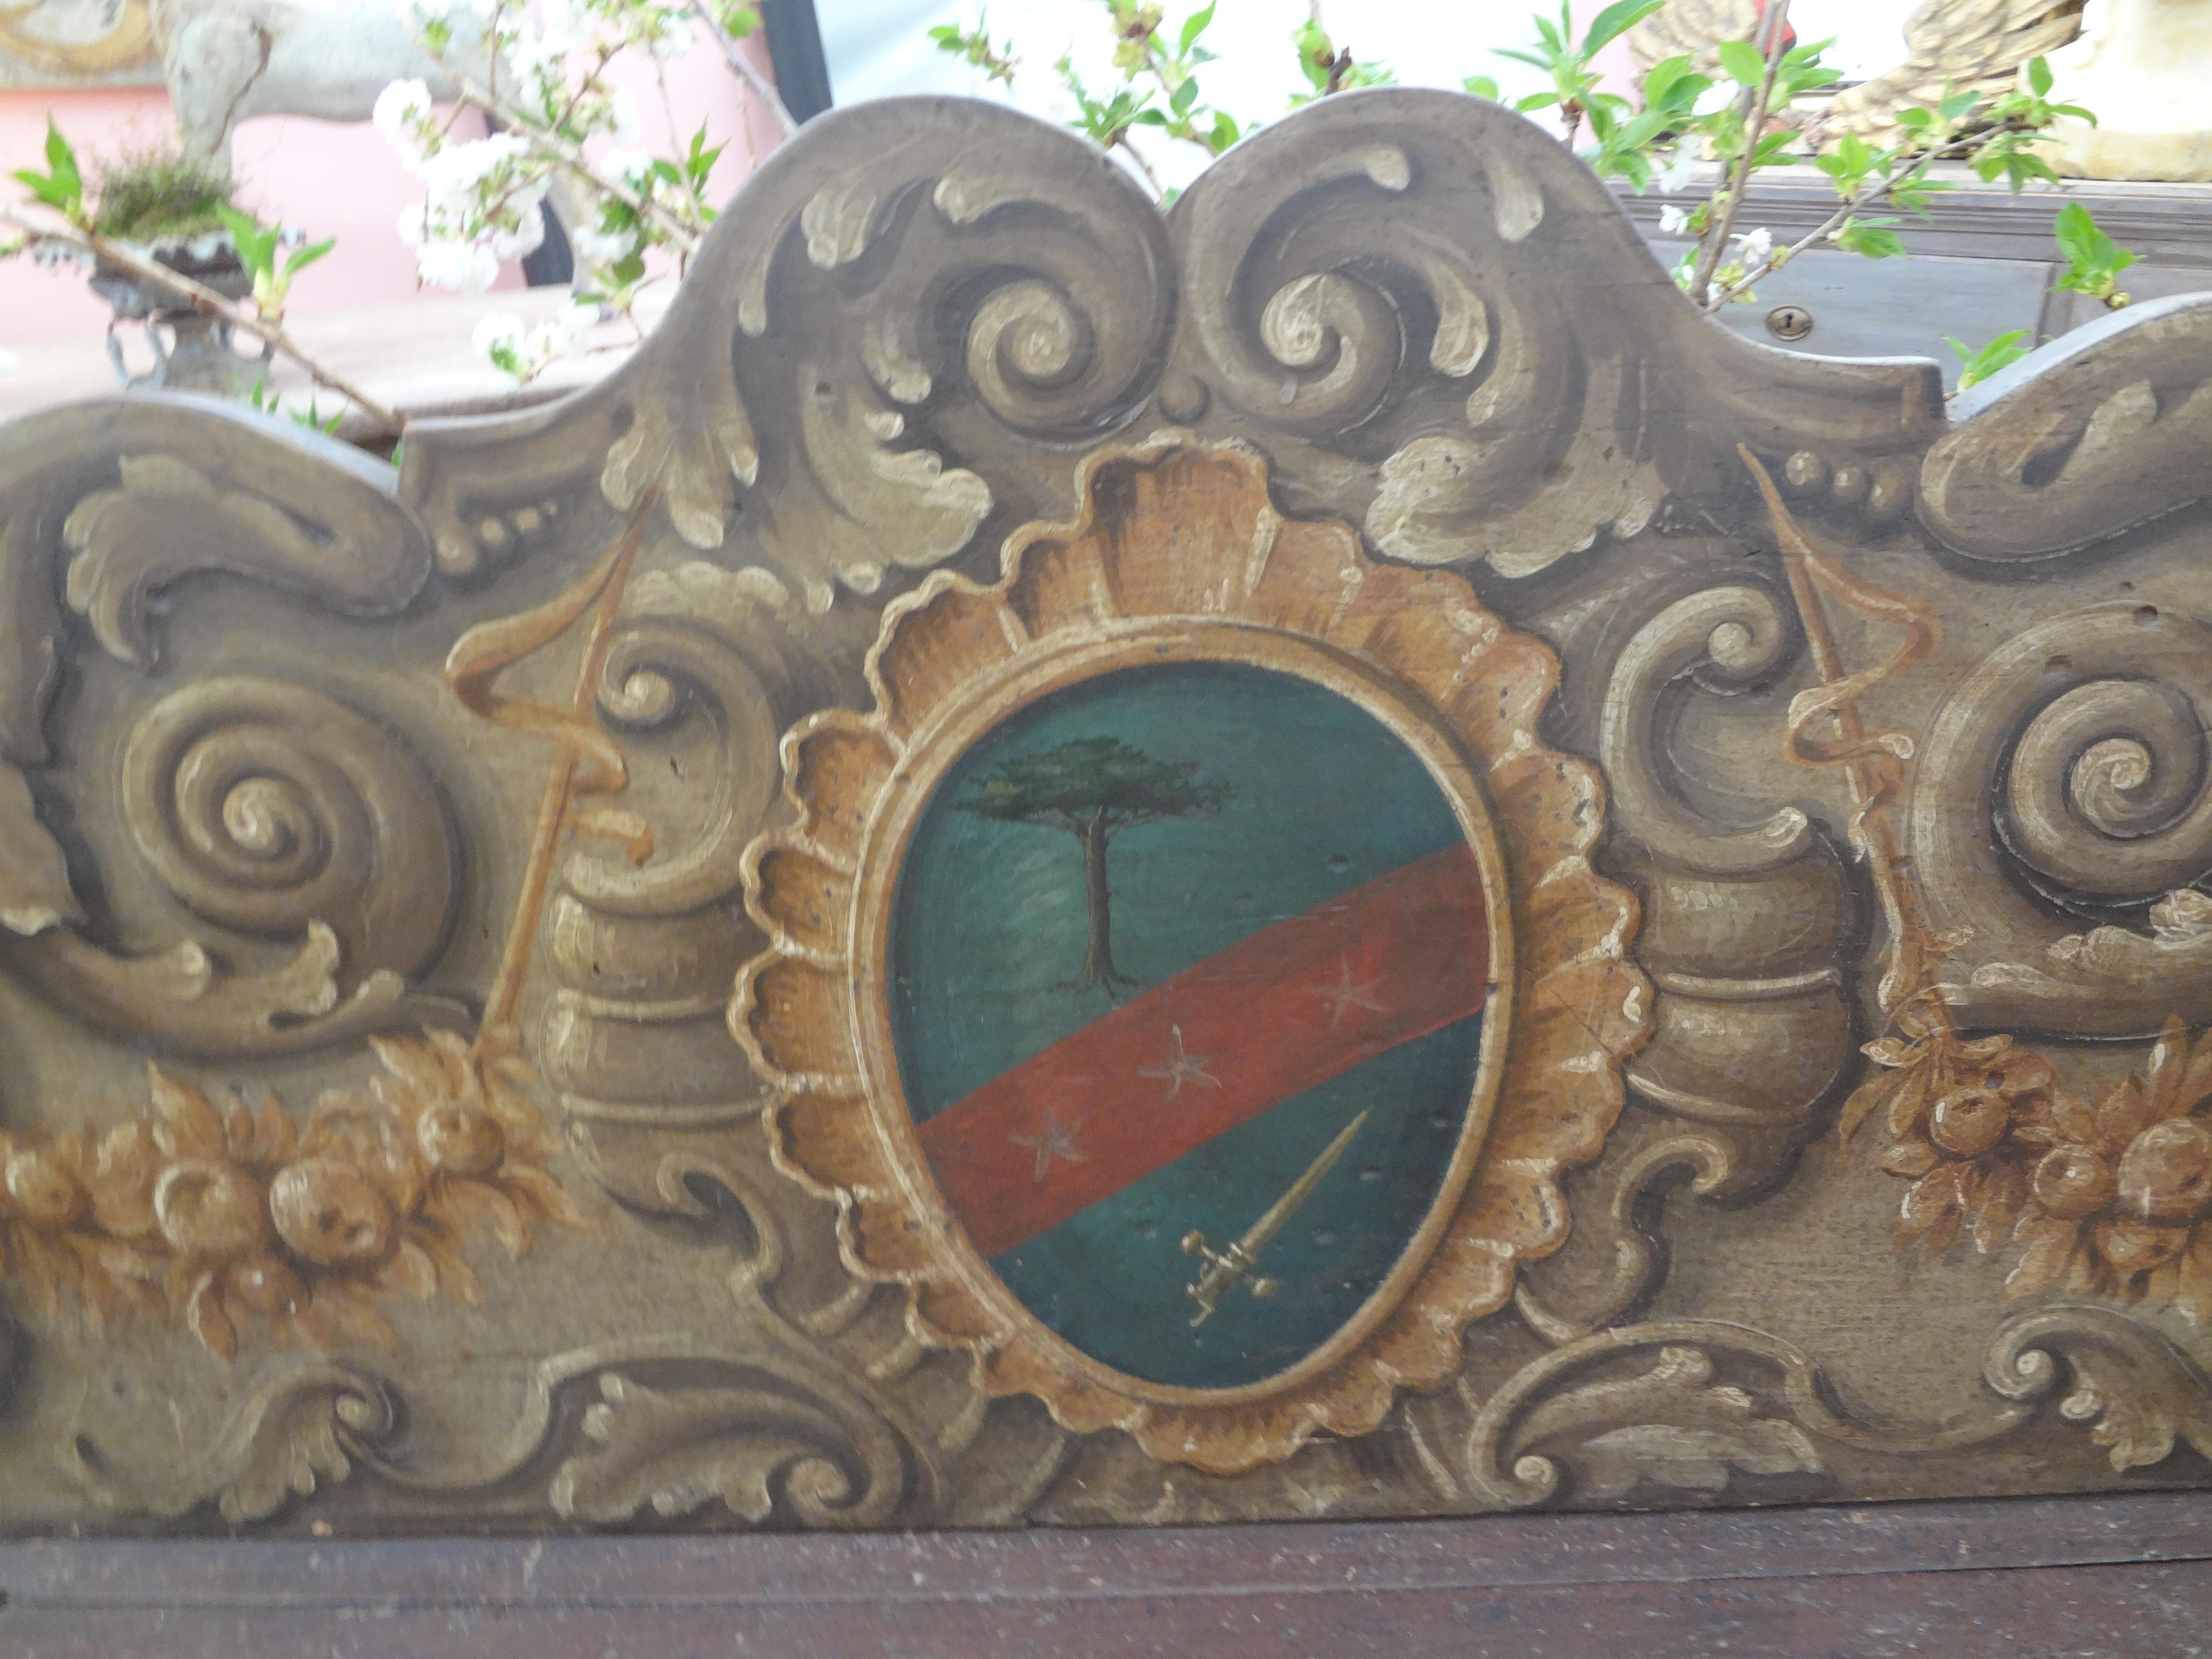 Italian 17th Century Tuscan Cassapanca or Bench with a Family Crest